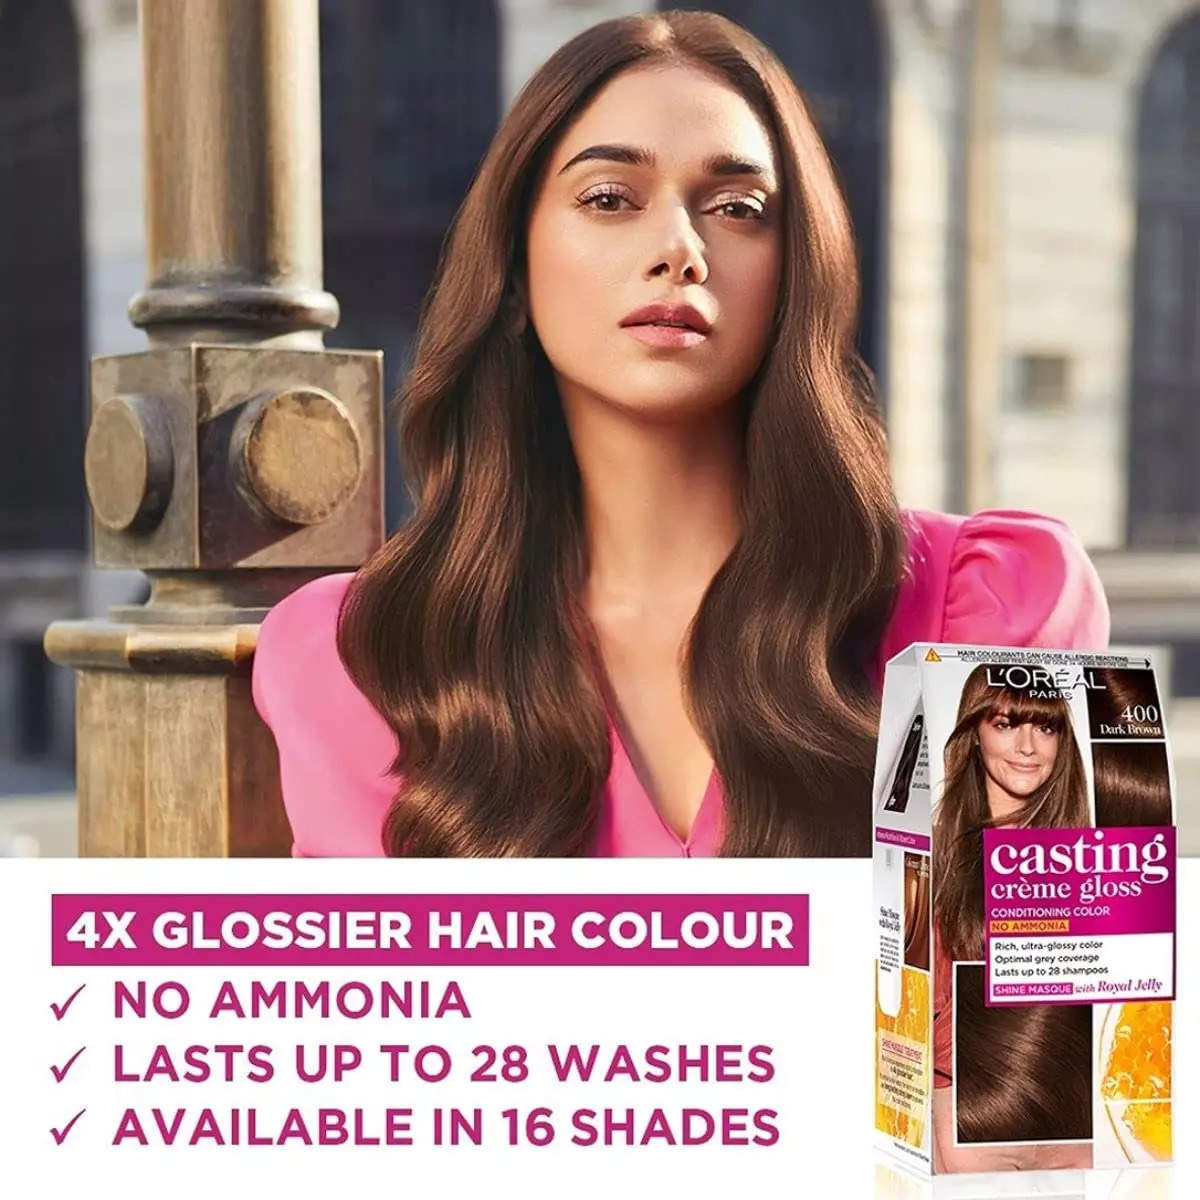 Best hair color for women: Best Hair Colors For Women; Find Full List Here  - The Economic Times